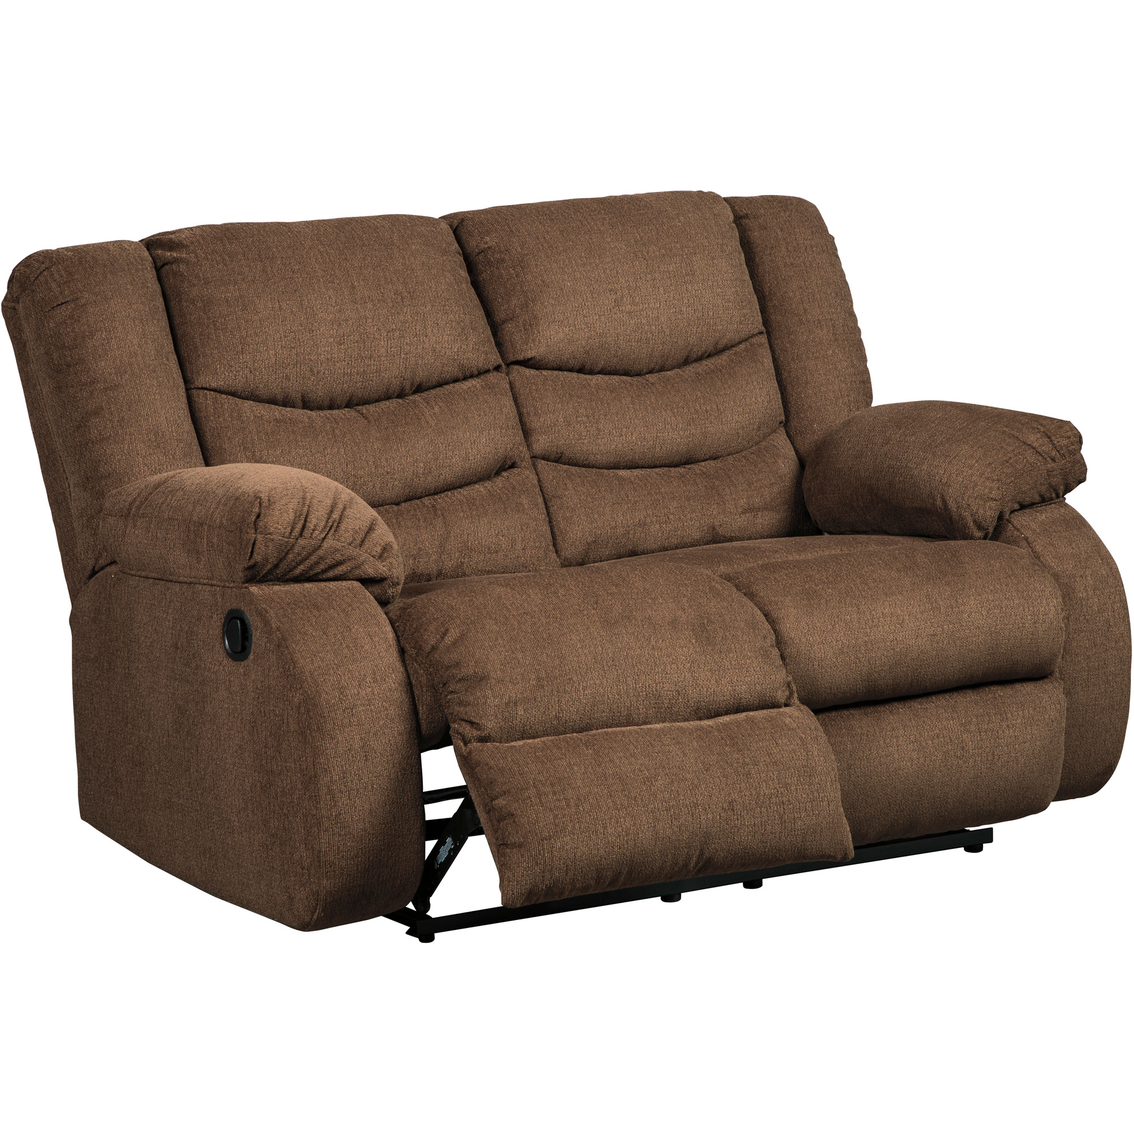 Signature Design By Ashley Tulen Reclining Sofa And